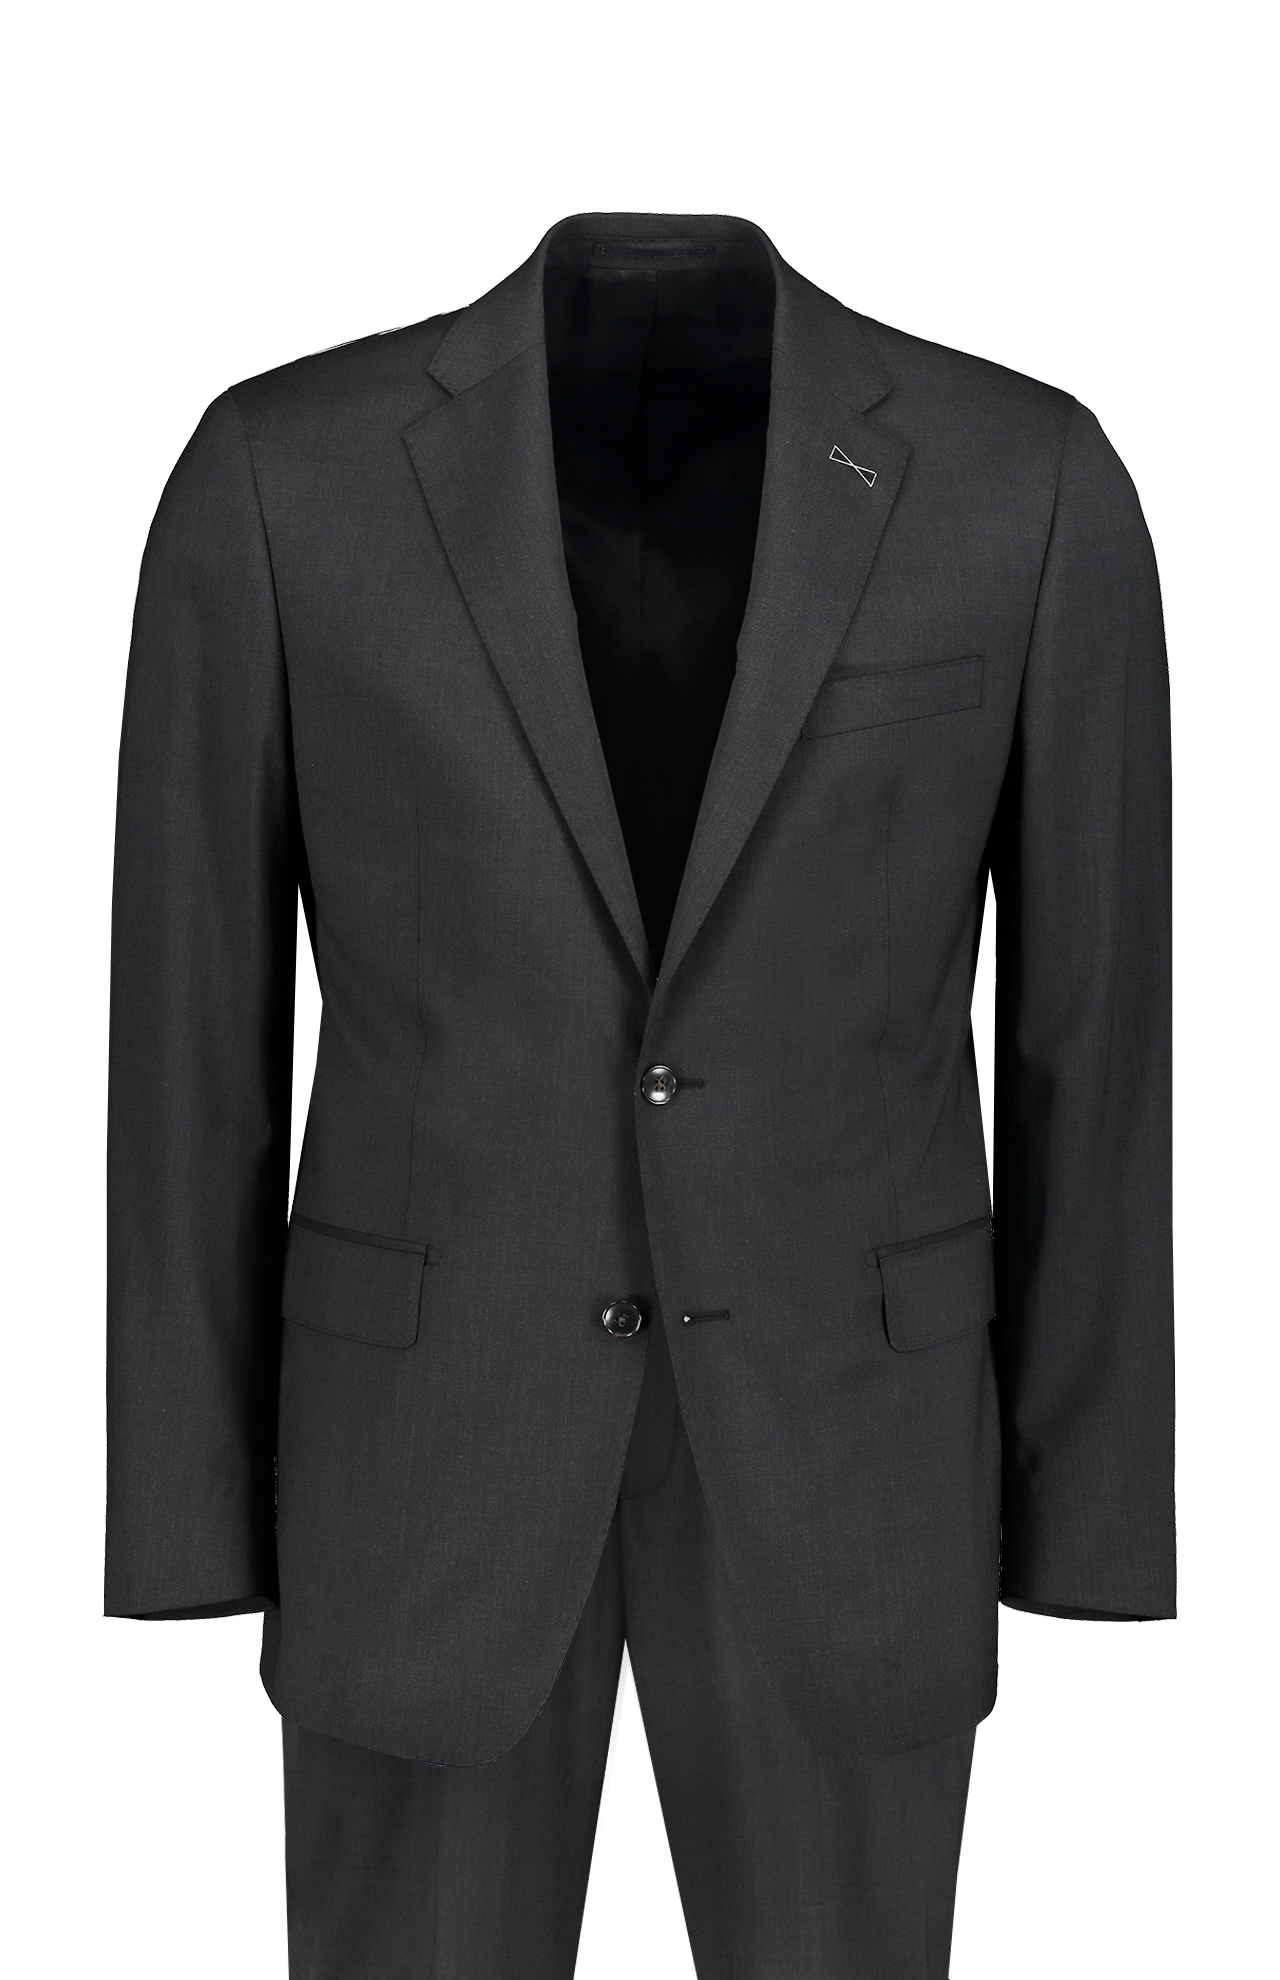 Atelier Munro Stretch Wool Suit Charcoal Front Mannequin Image (6998653534323)